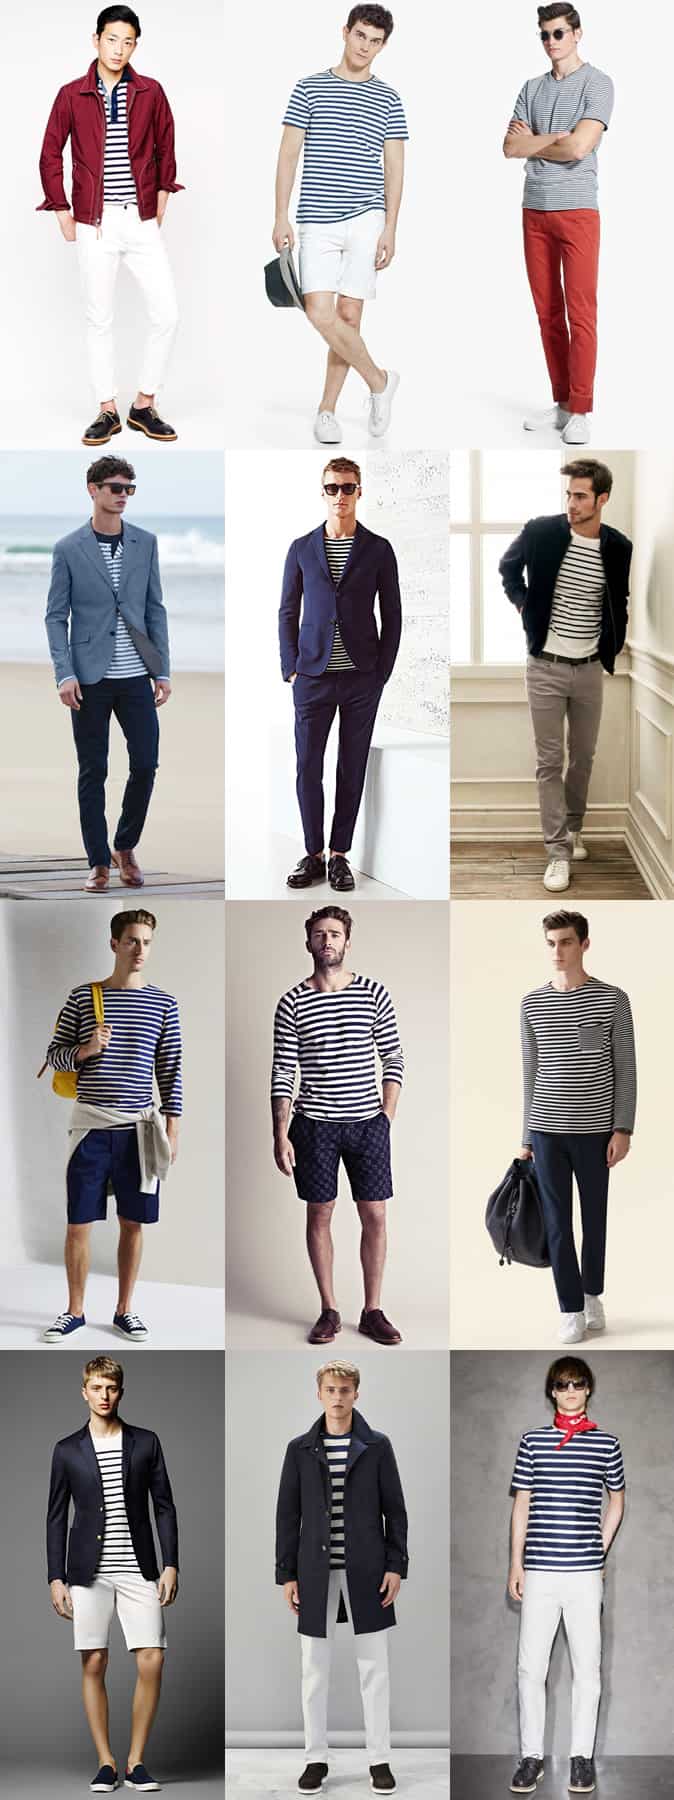 Men's Breton Stripe T-Shirts and Tops Outfit Inspiration Lookbook